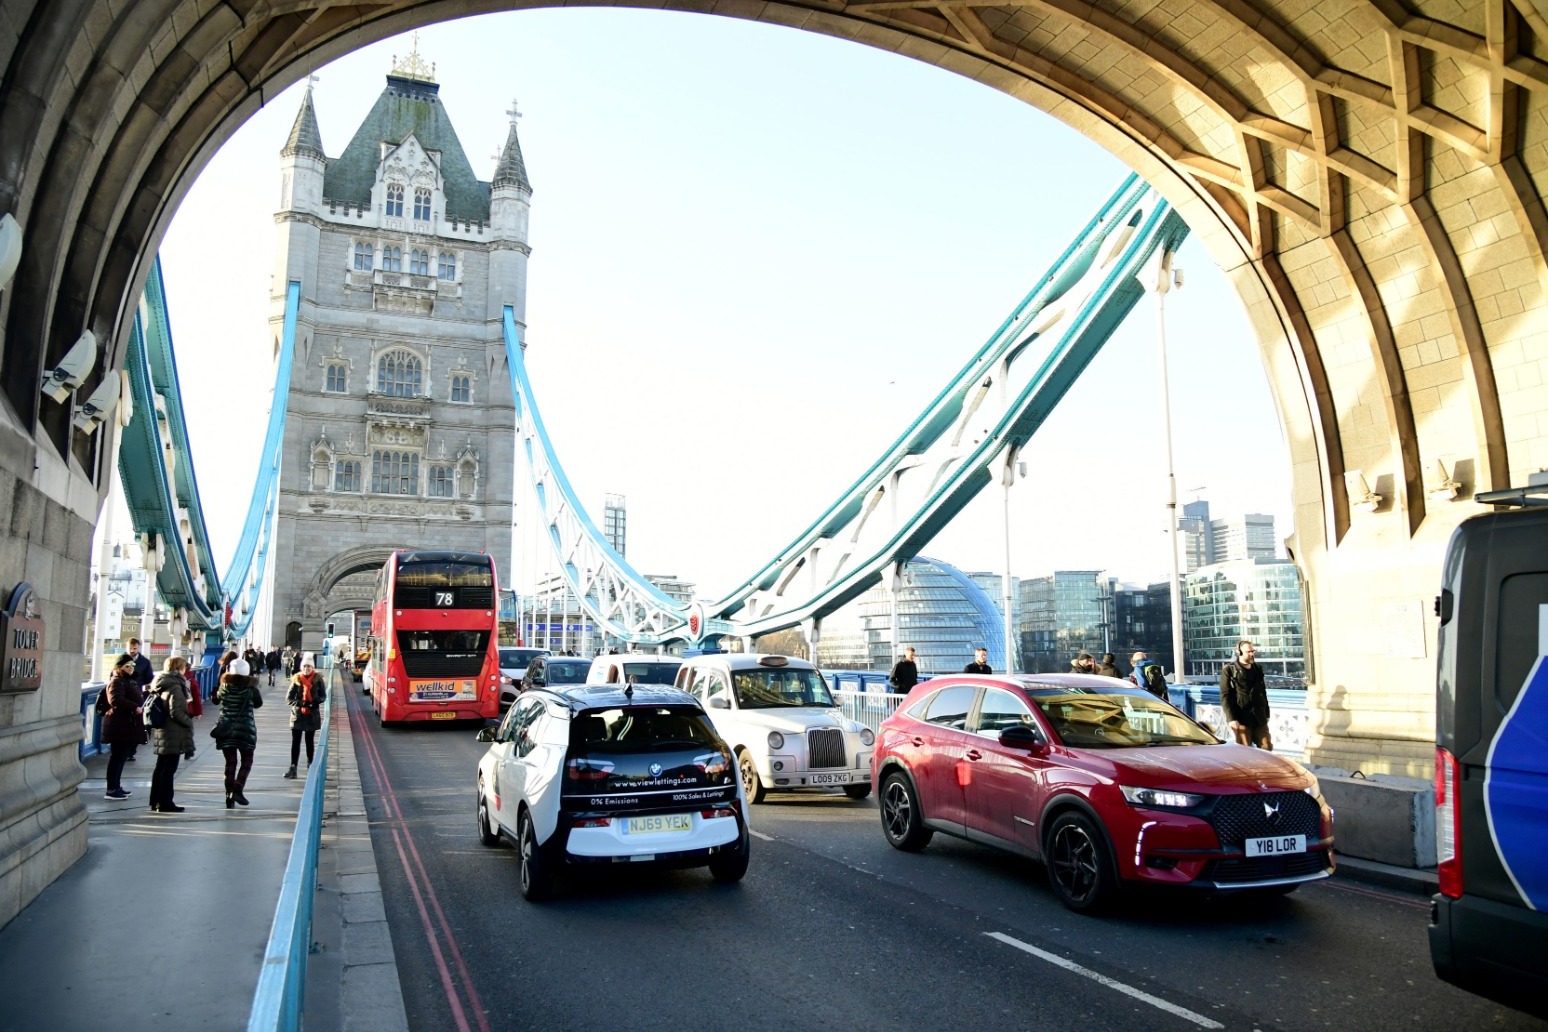 London Bridge closed to most vehicles until October 